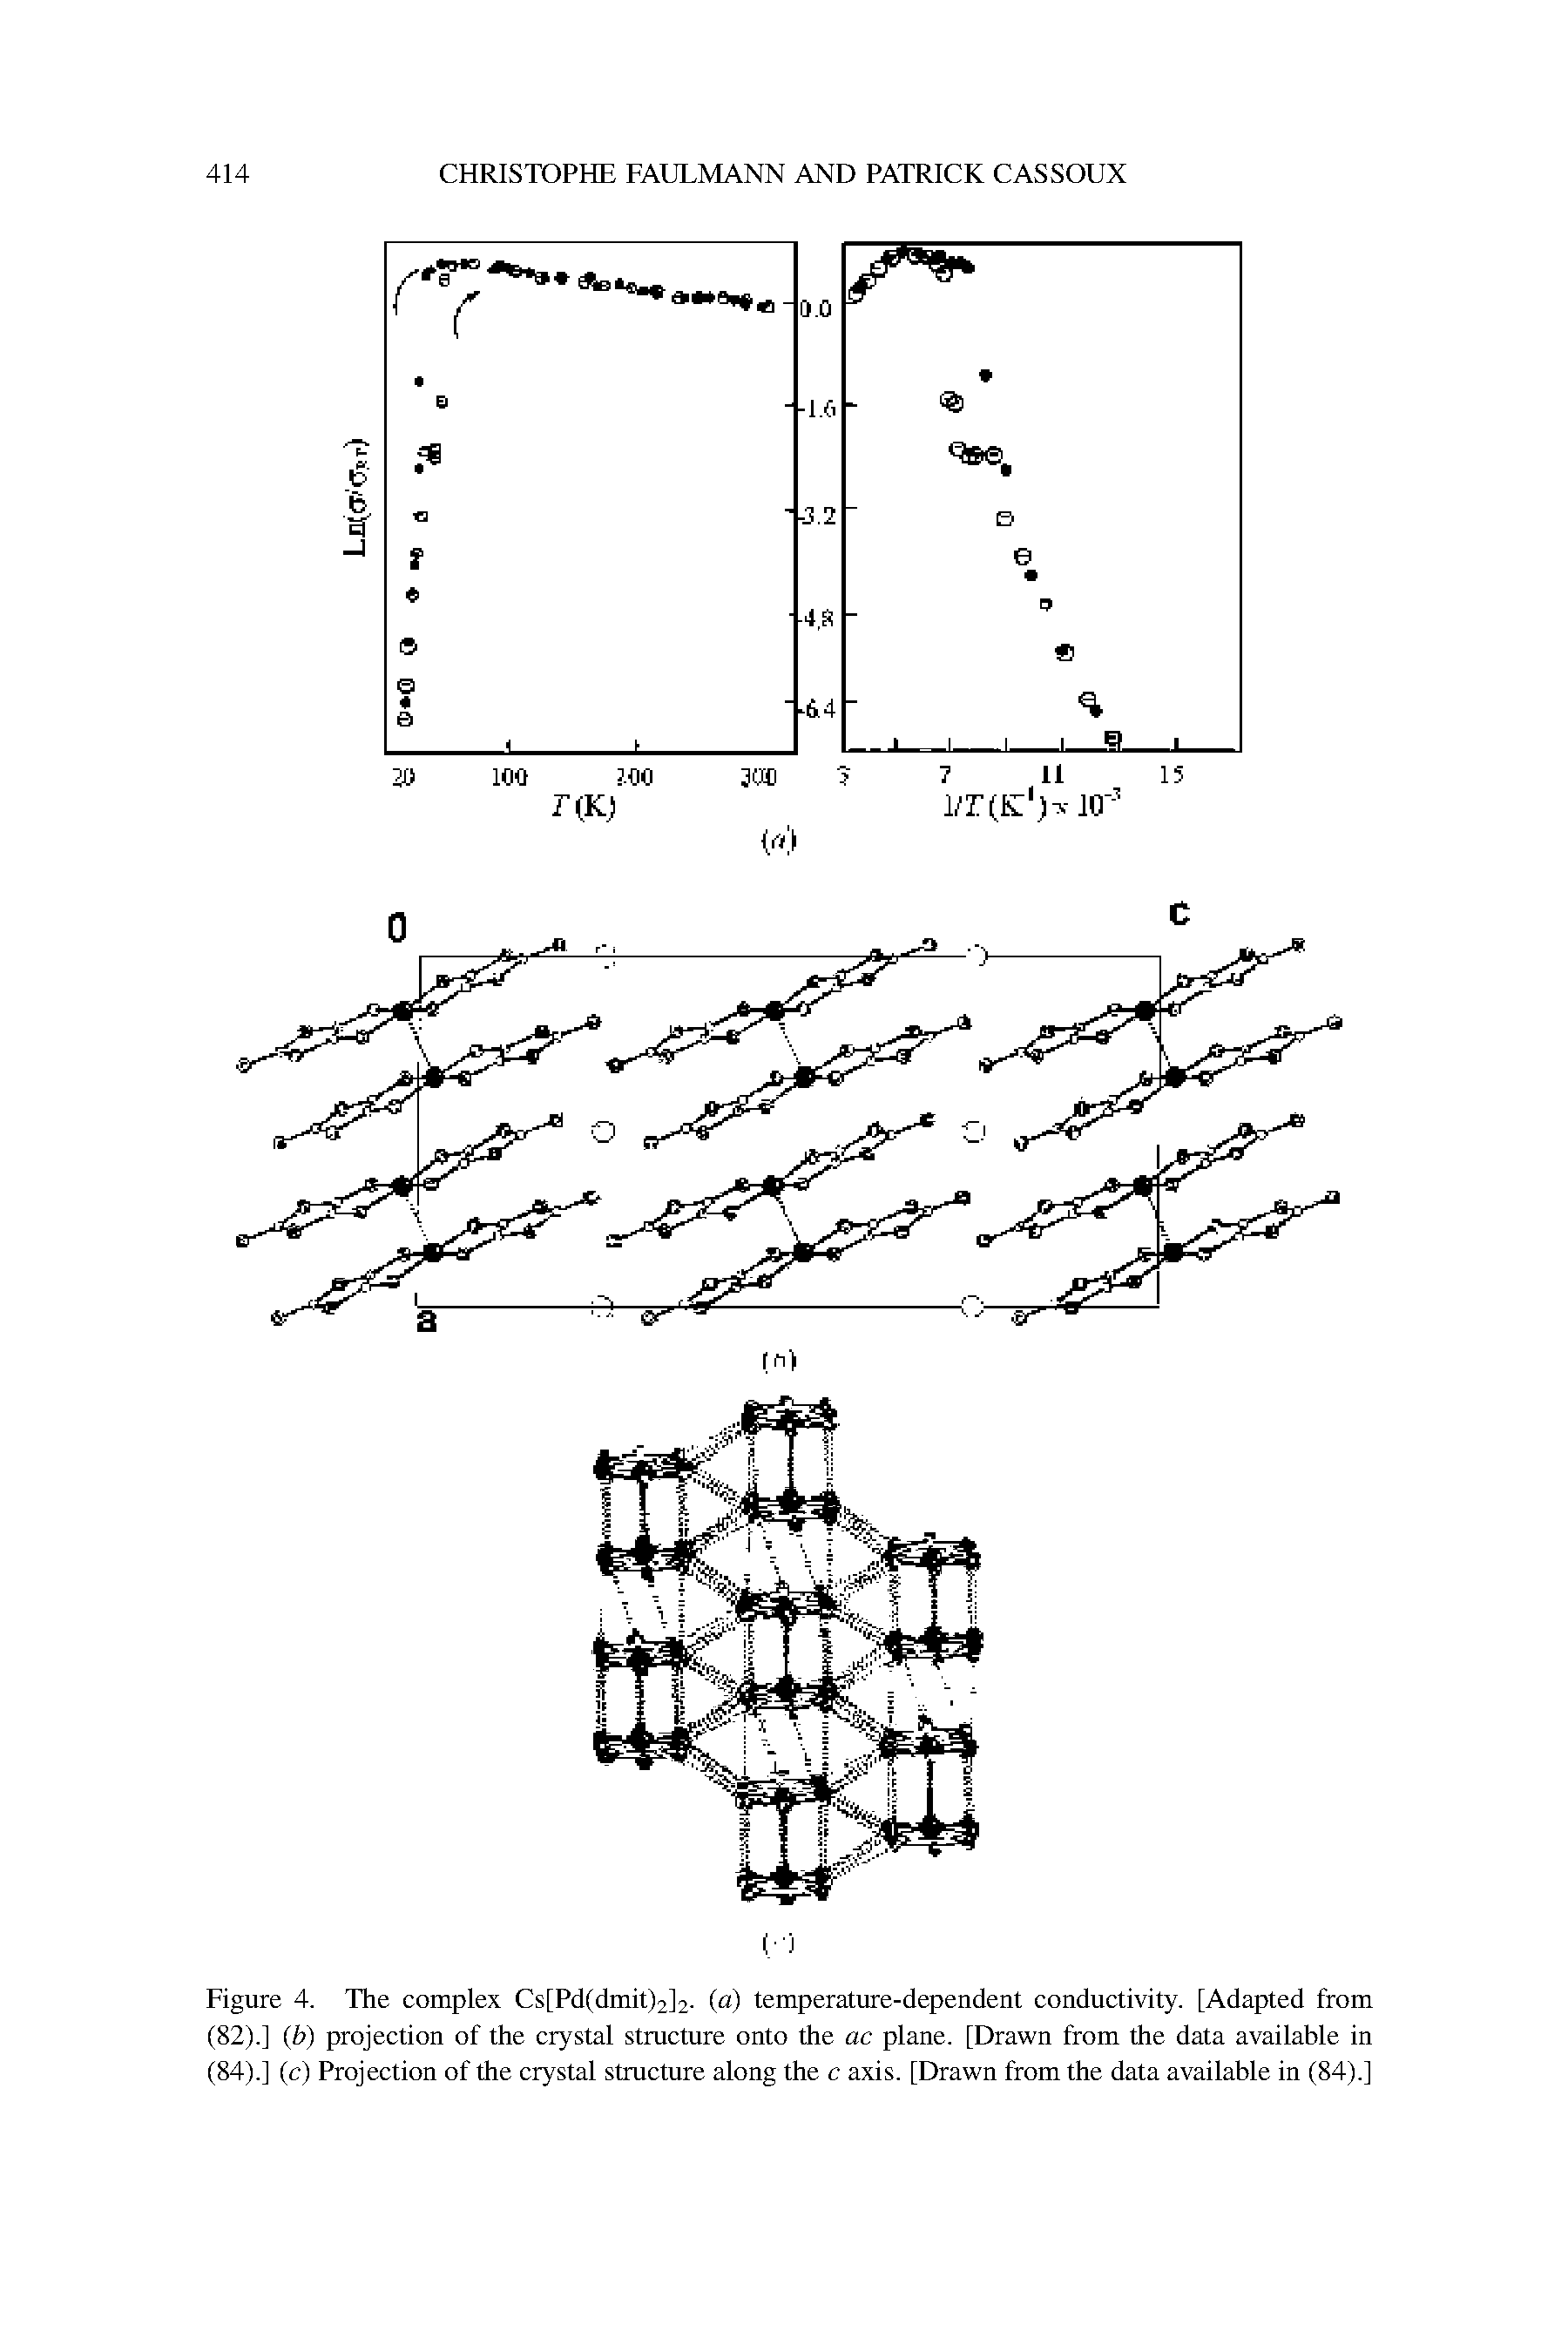 Figure 4. The complex Cs[Pd(dmit)2]2- (a) temperature-dependent conductivity. [Adapted from (82).] (b) projection of the crystal structure onto the ac plane. [Drawn from the data available in (84).] (c) Projection of the crystal structure along the c axis. [Drawn from the data available in (84).]...